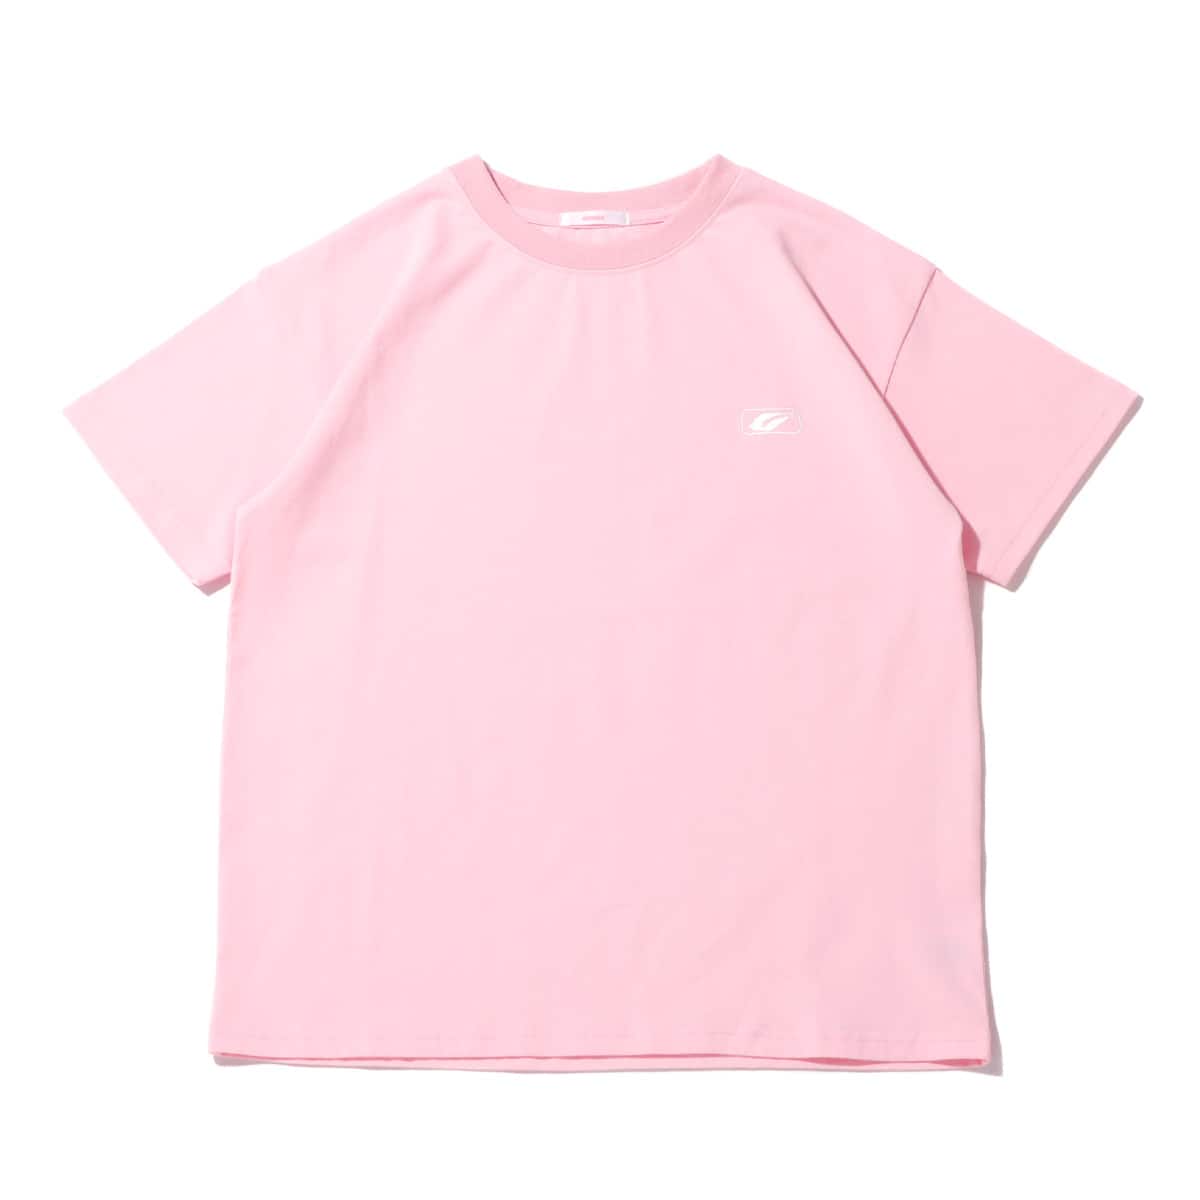 atmos pink ロゴ Tシャツ PINK 23FA-I_photo_large